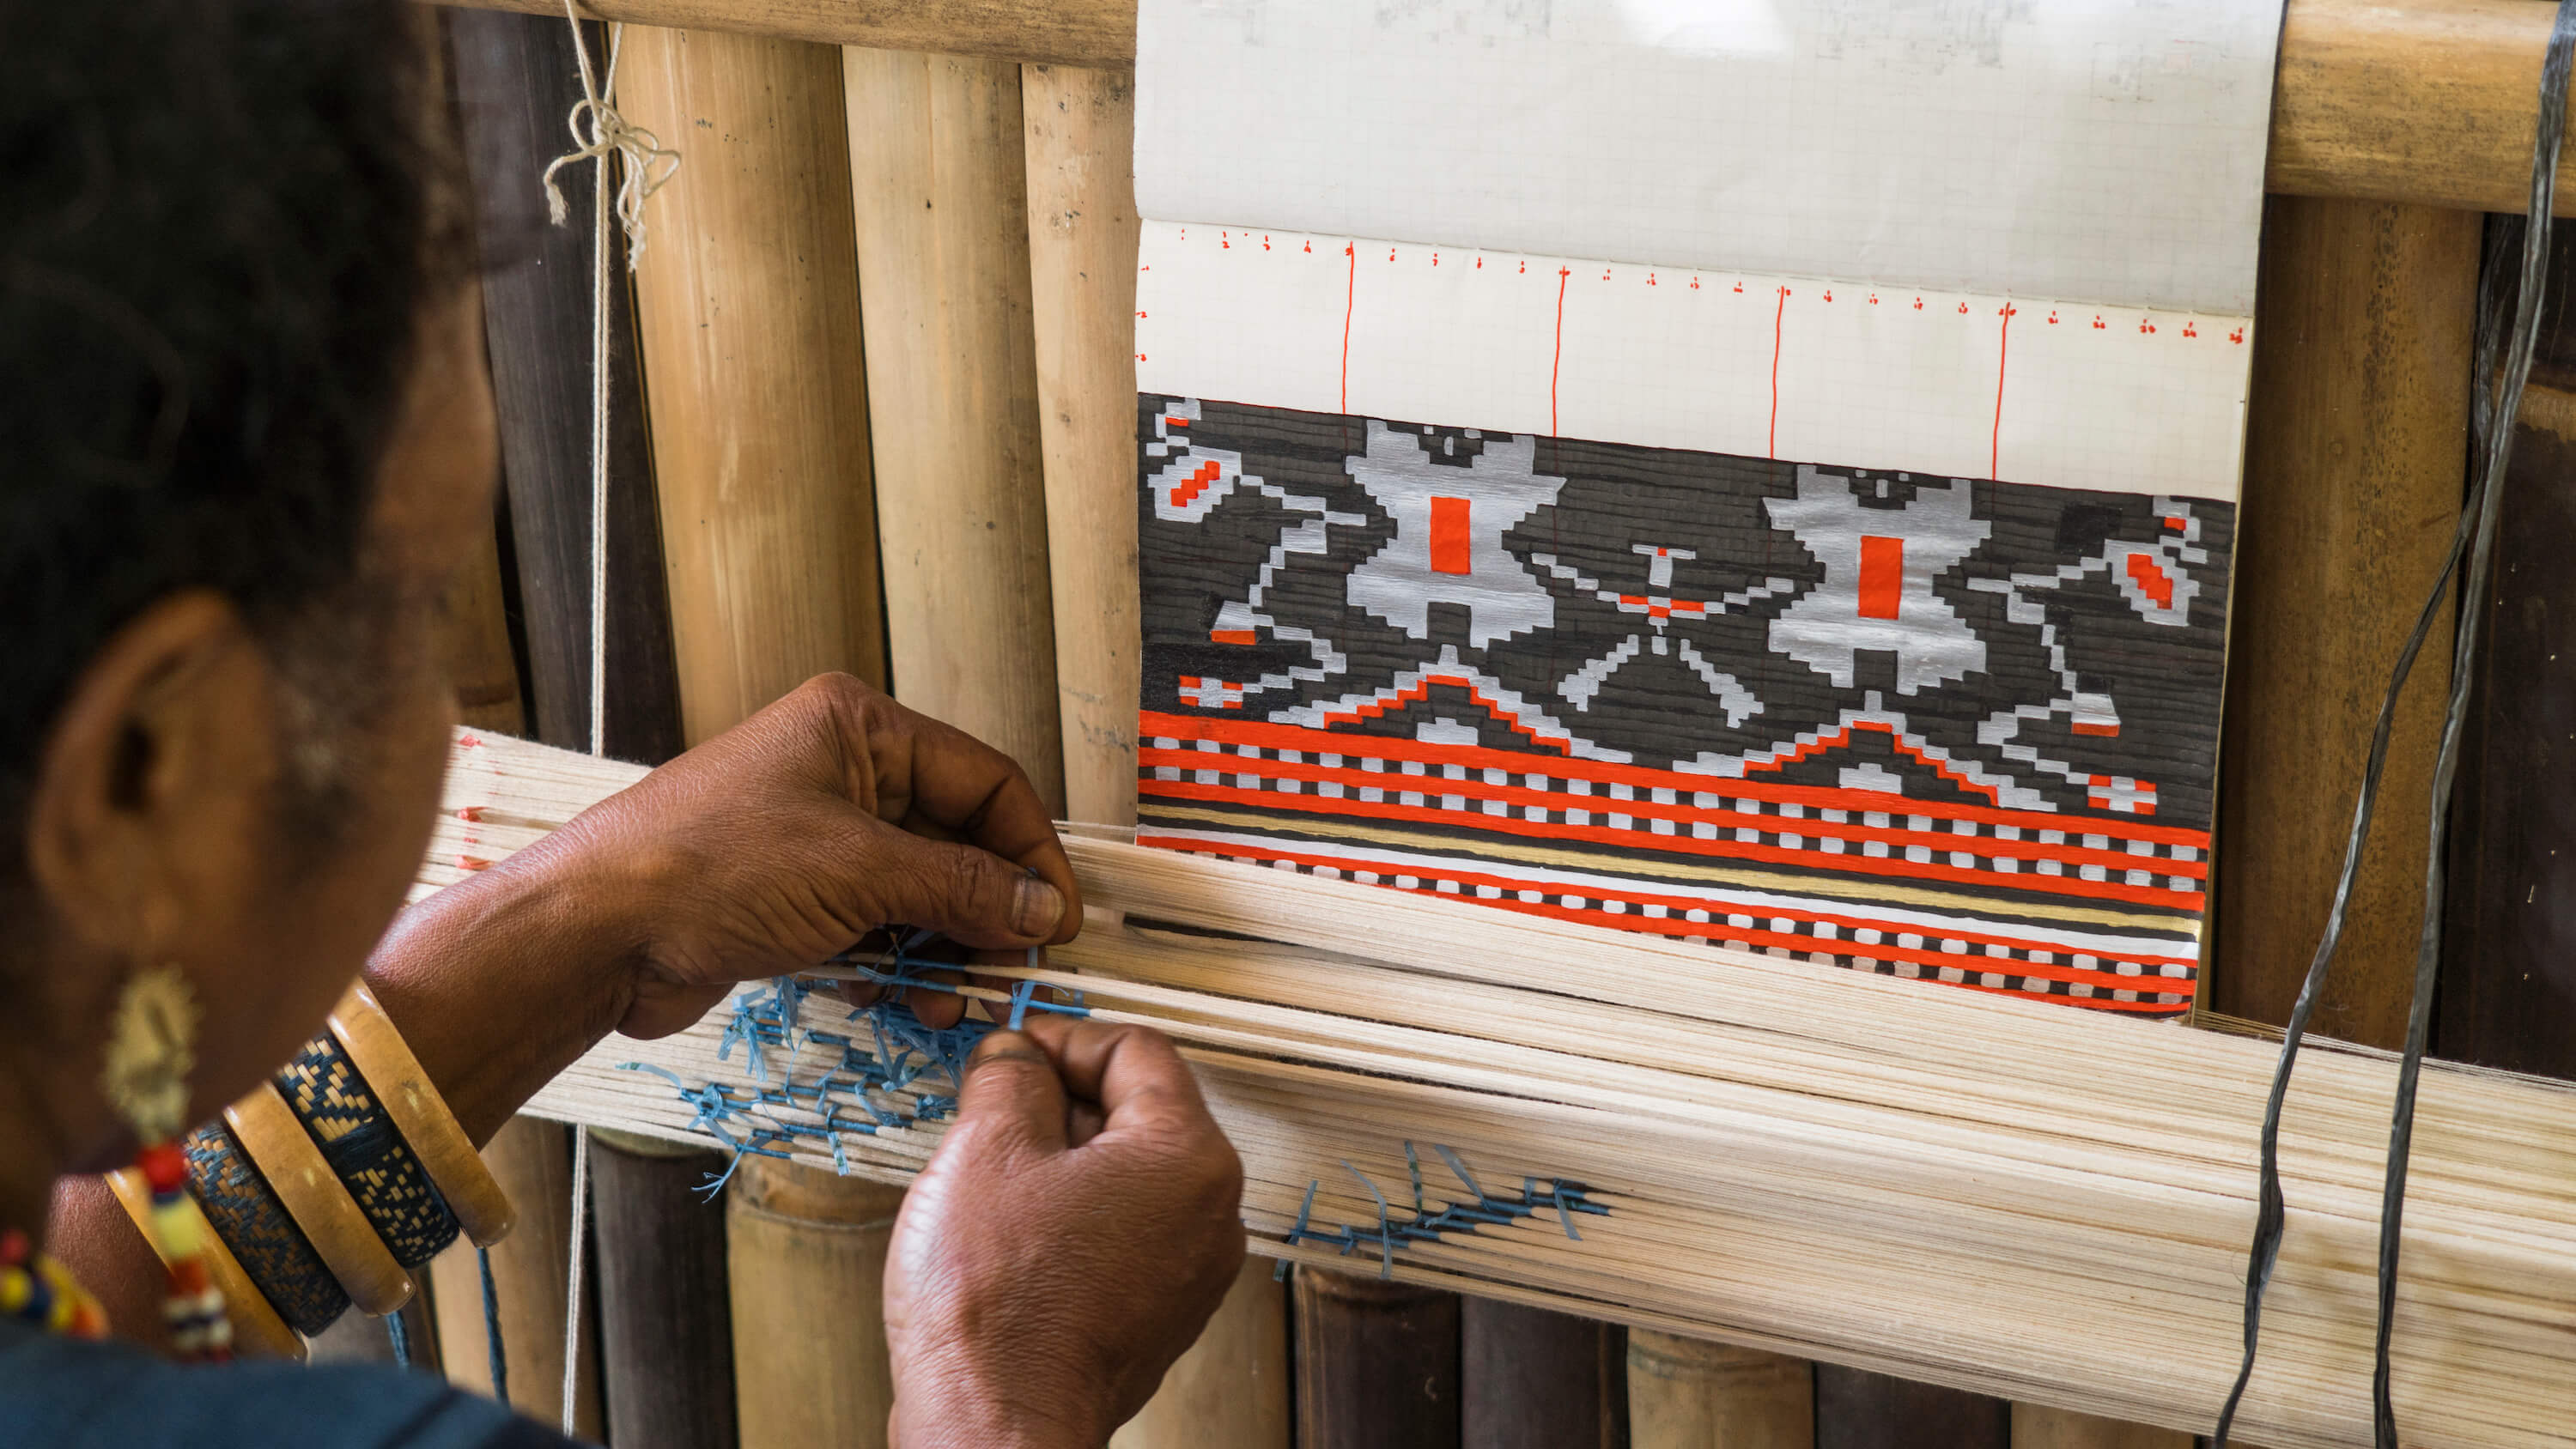 A weaver from Watubo demonstrates resist-binding, a process of binding the yarn to create the desired motif. Photo by Andra Fembriarto